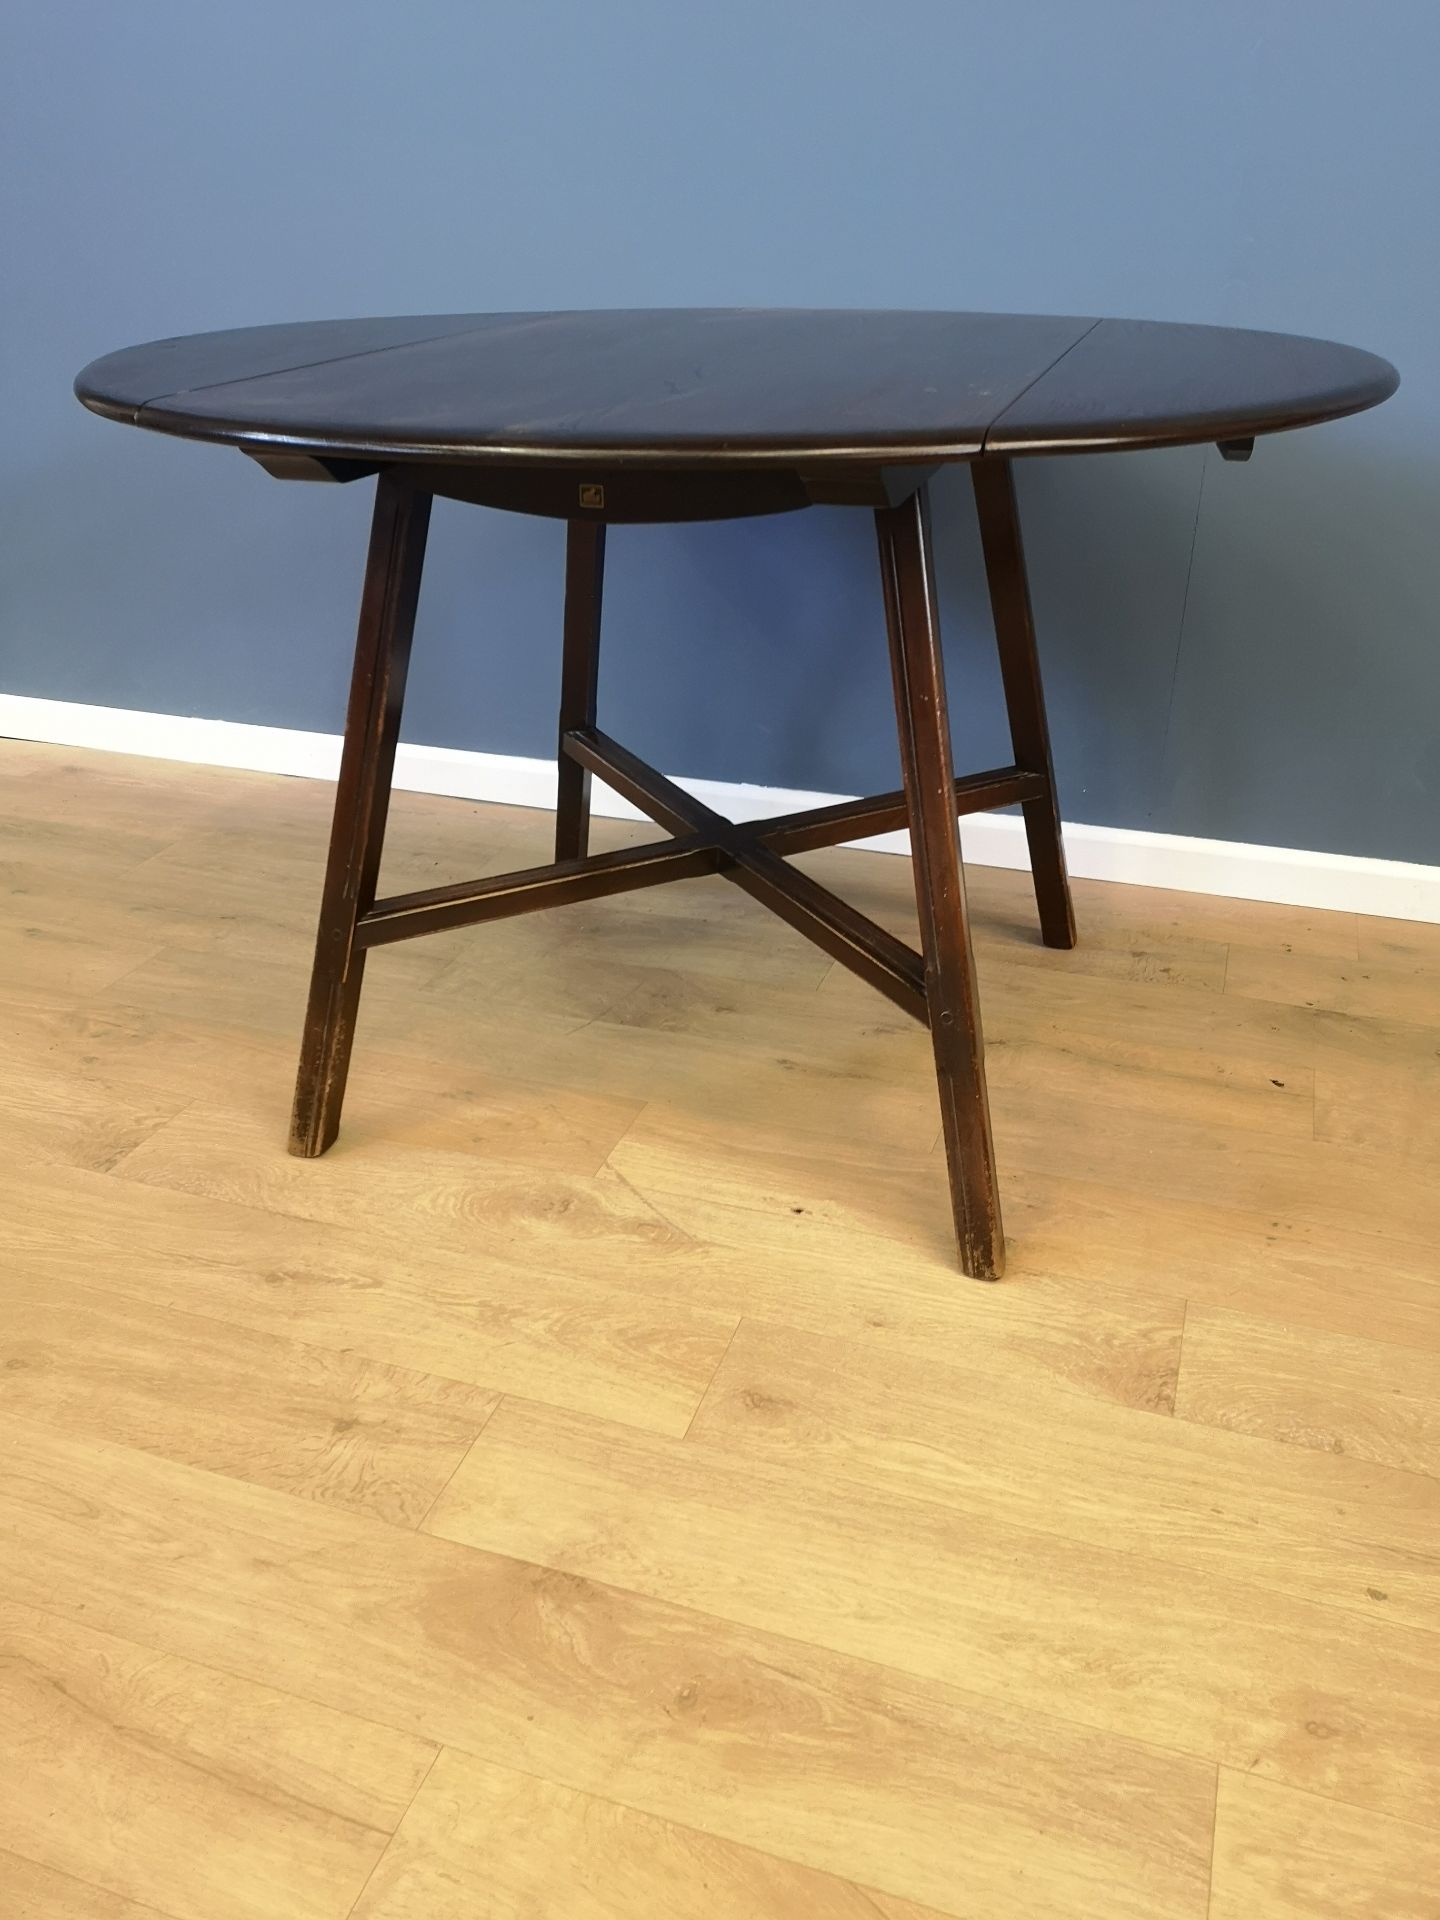 Ercol drop leaf table - Image 4 of 4